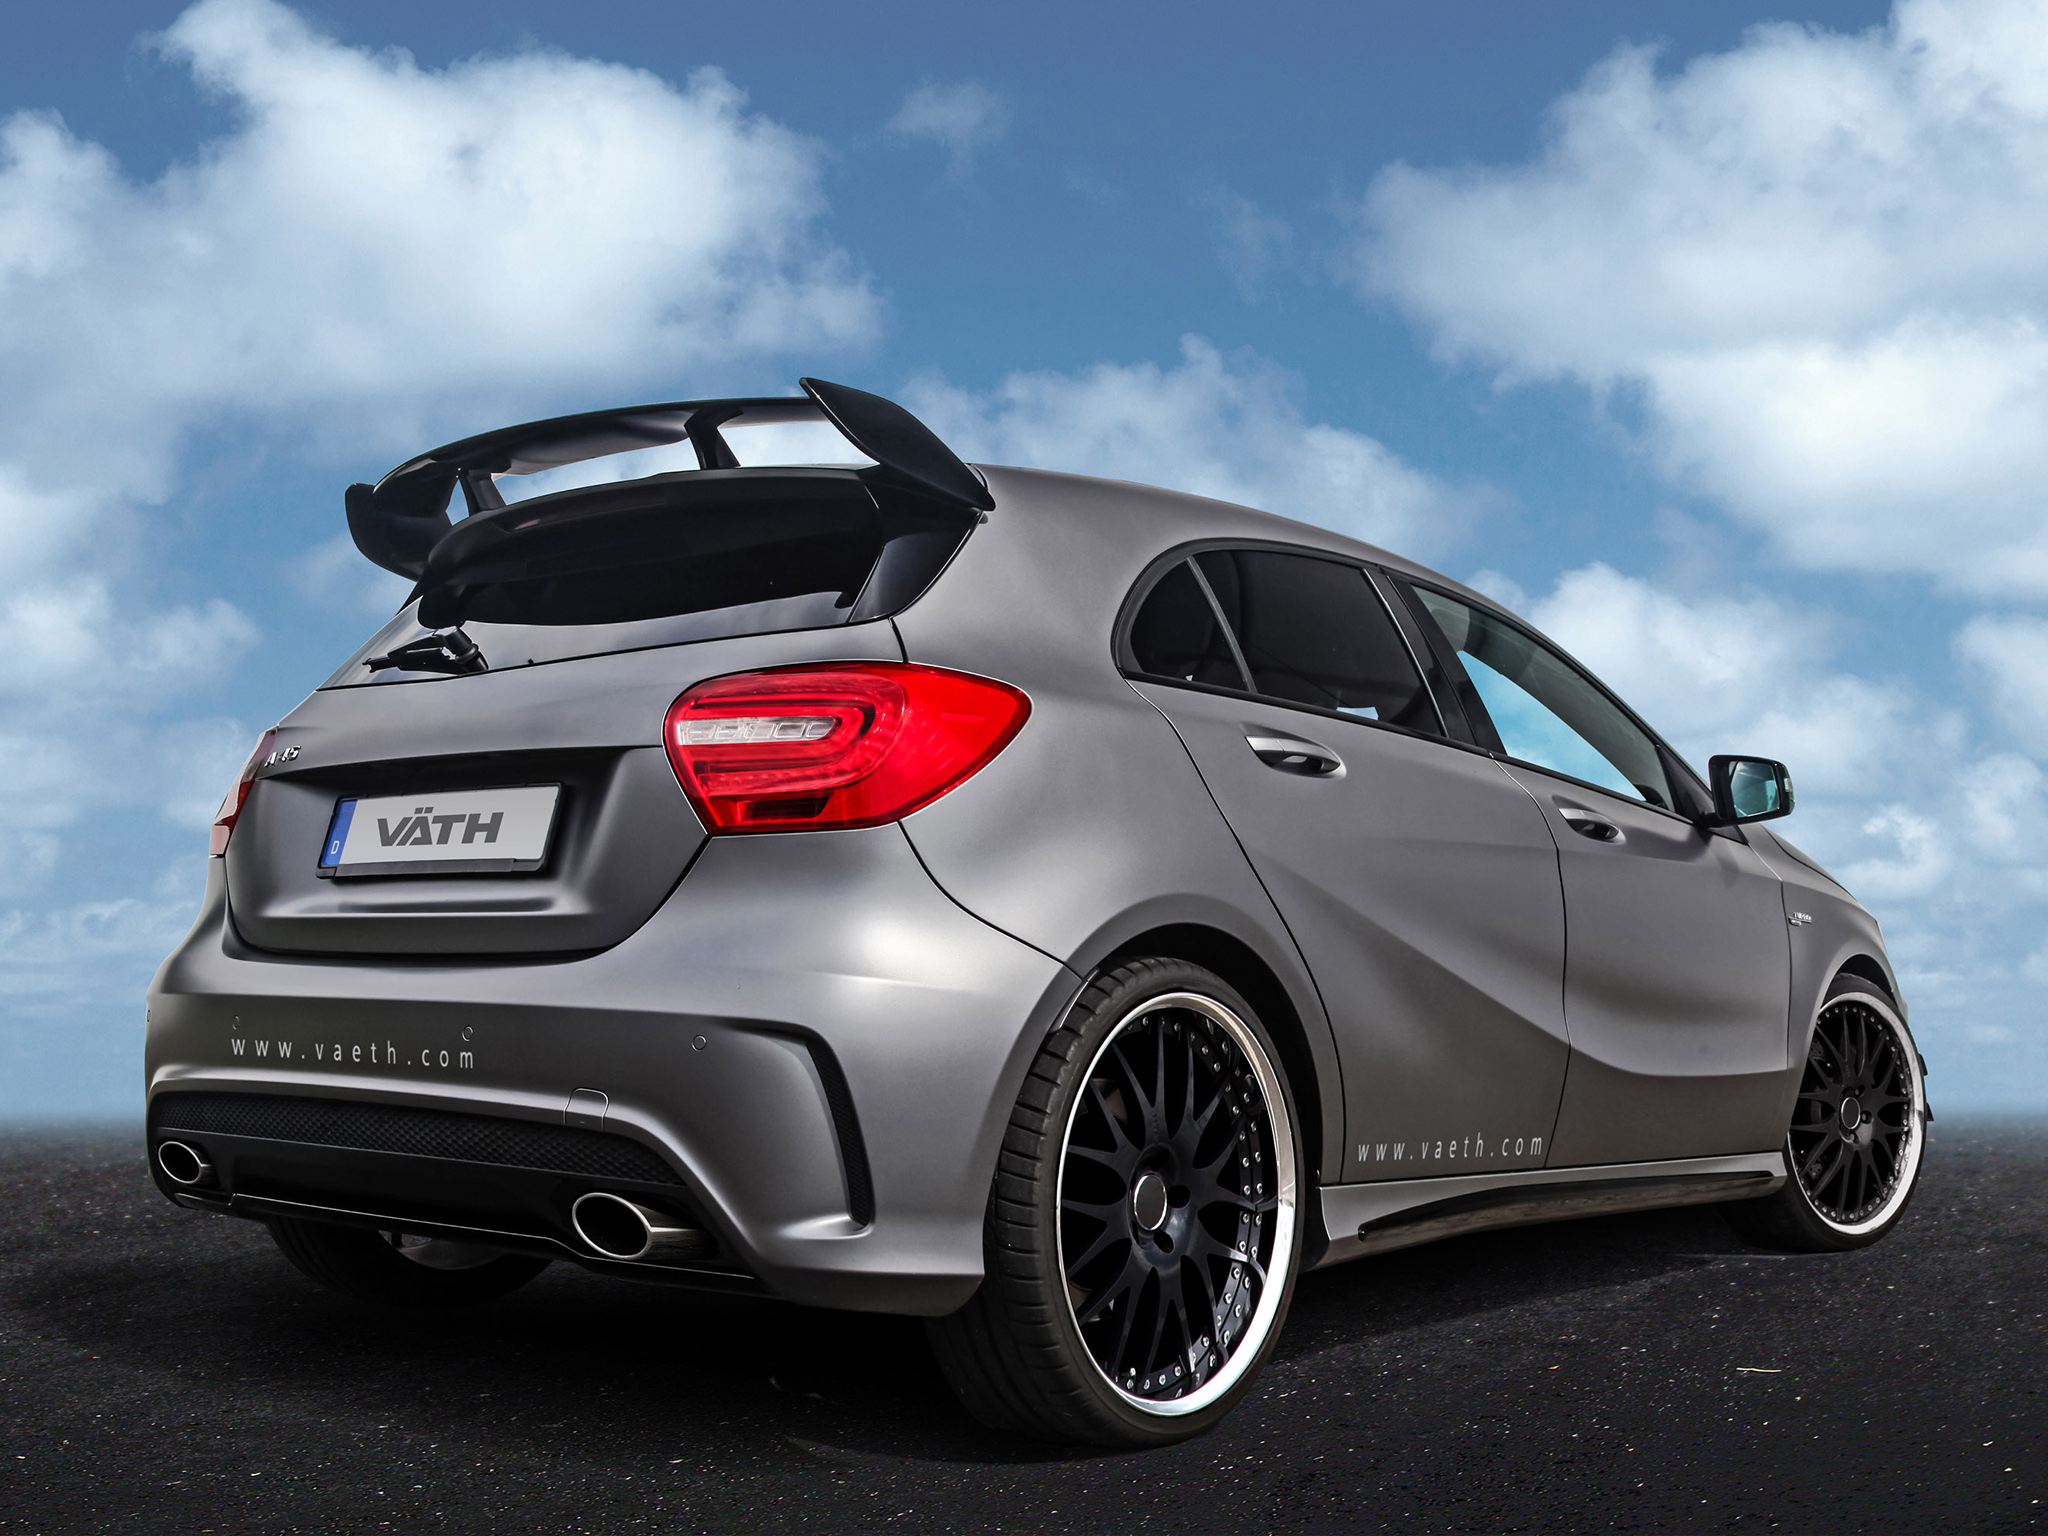 MercedesBenz A 45 AMG Tuned by VATH to 425 HP autoevolution